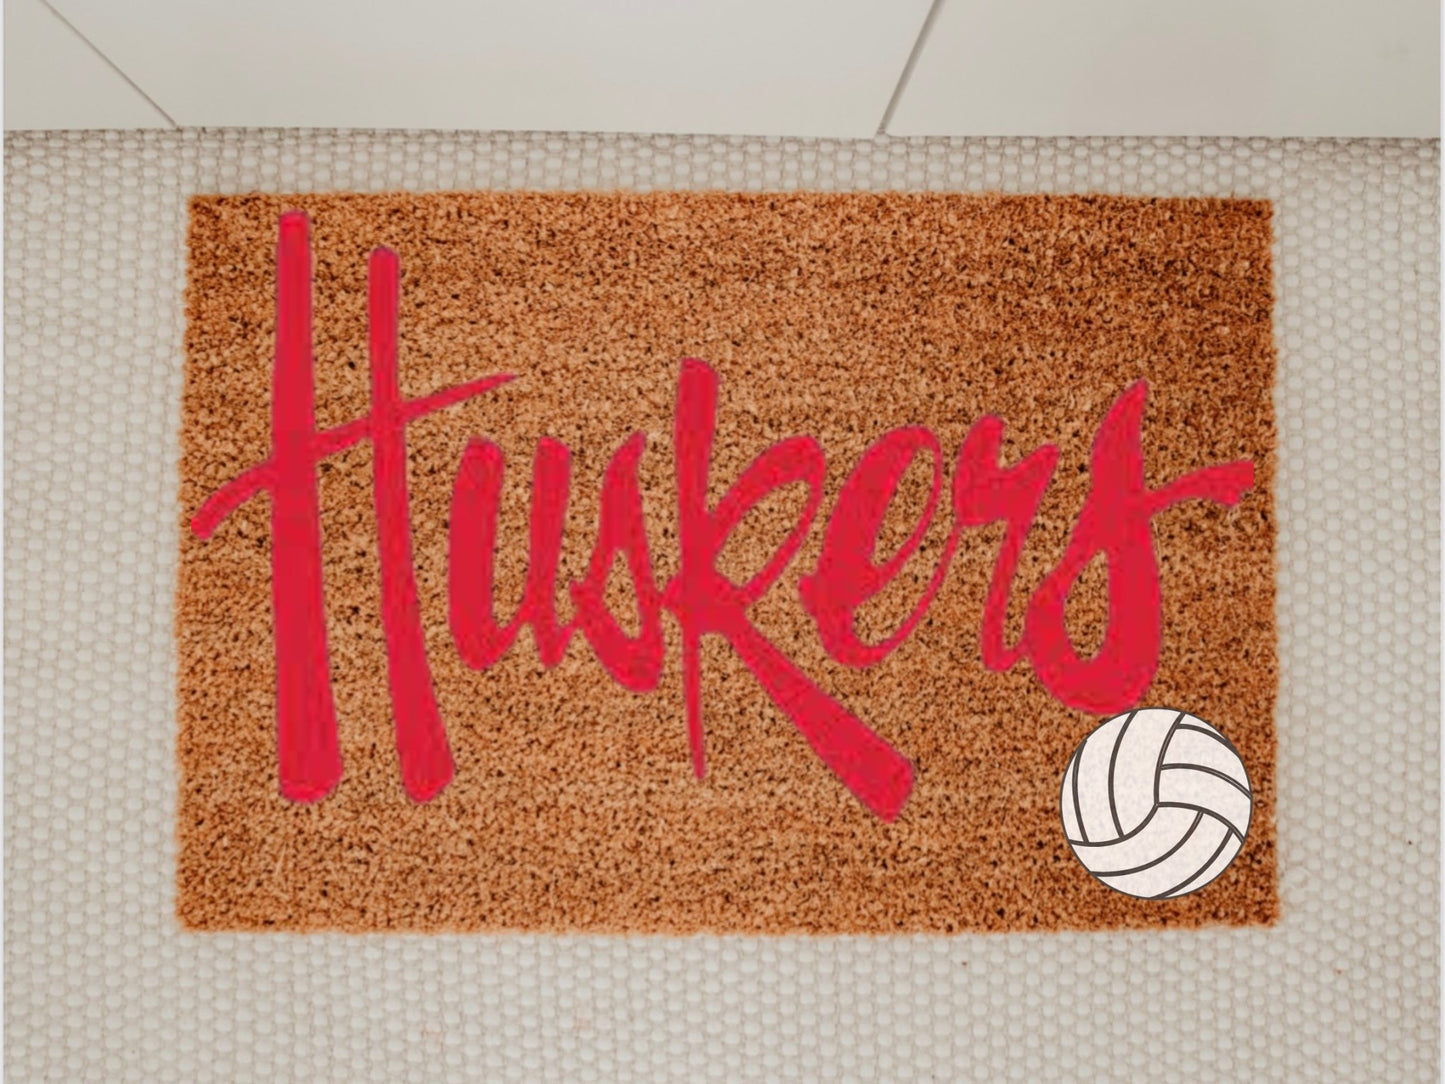 Huskers Volleyball - Miss Molly Designs, LLC